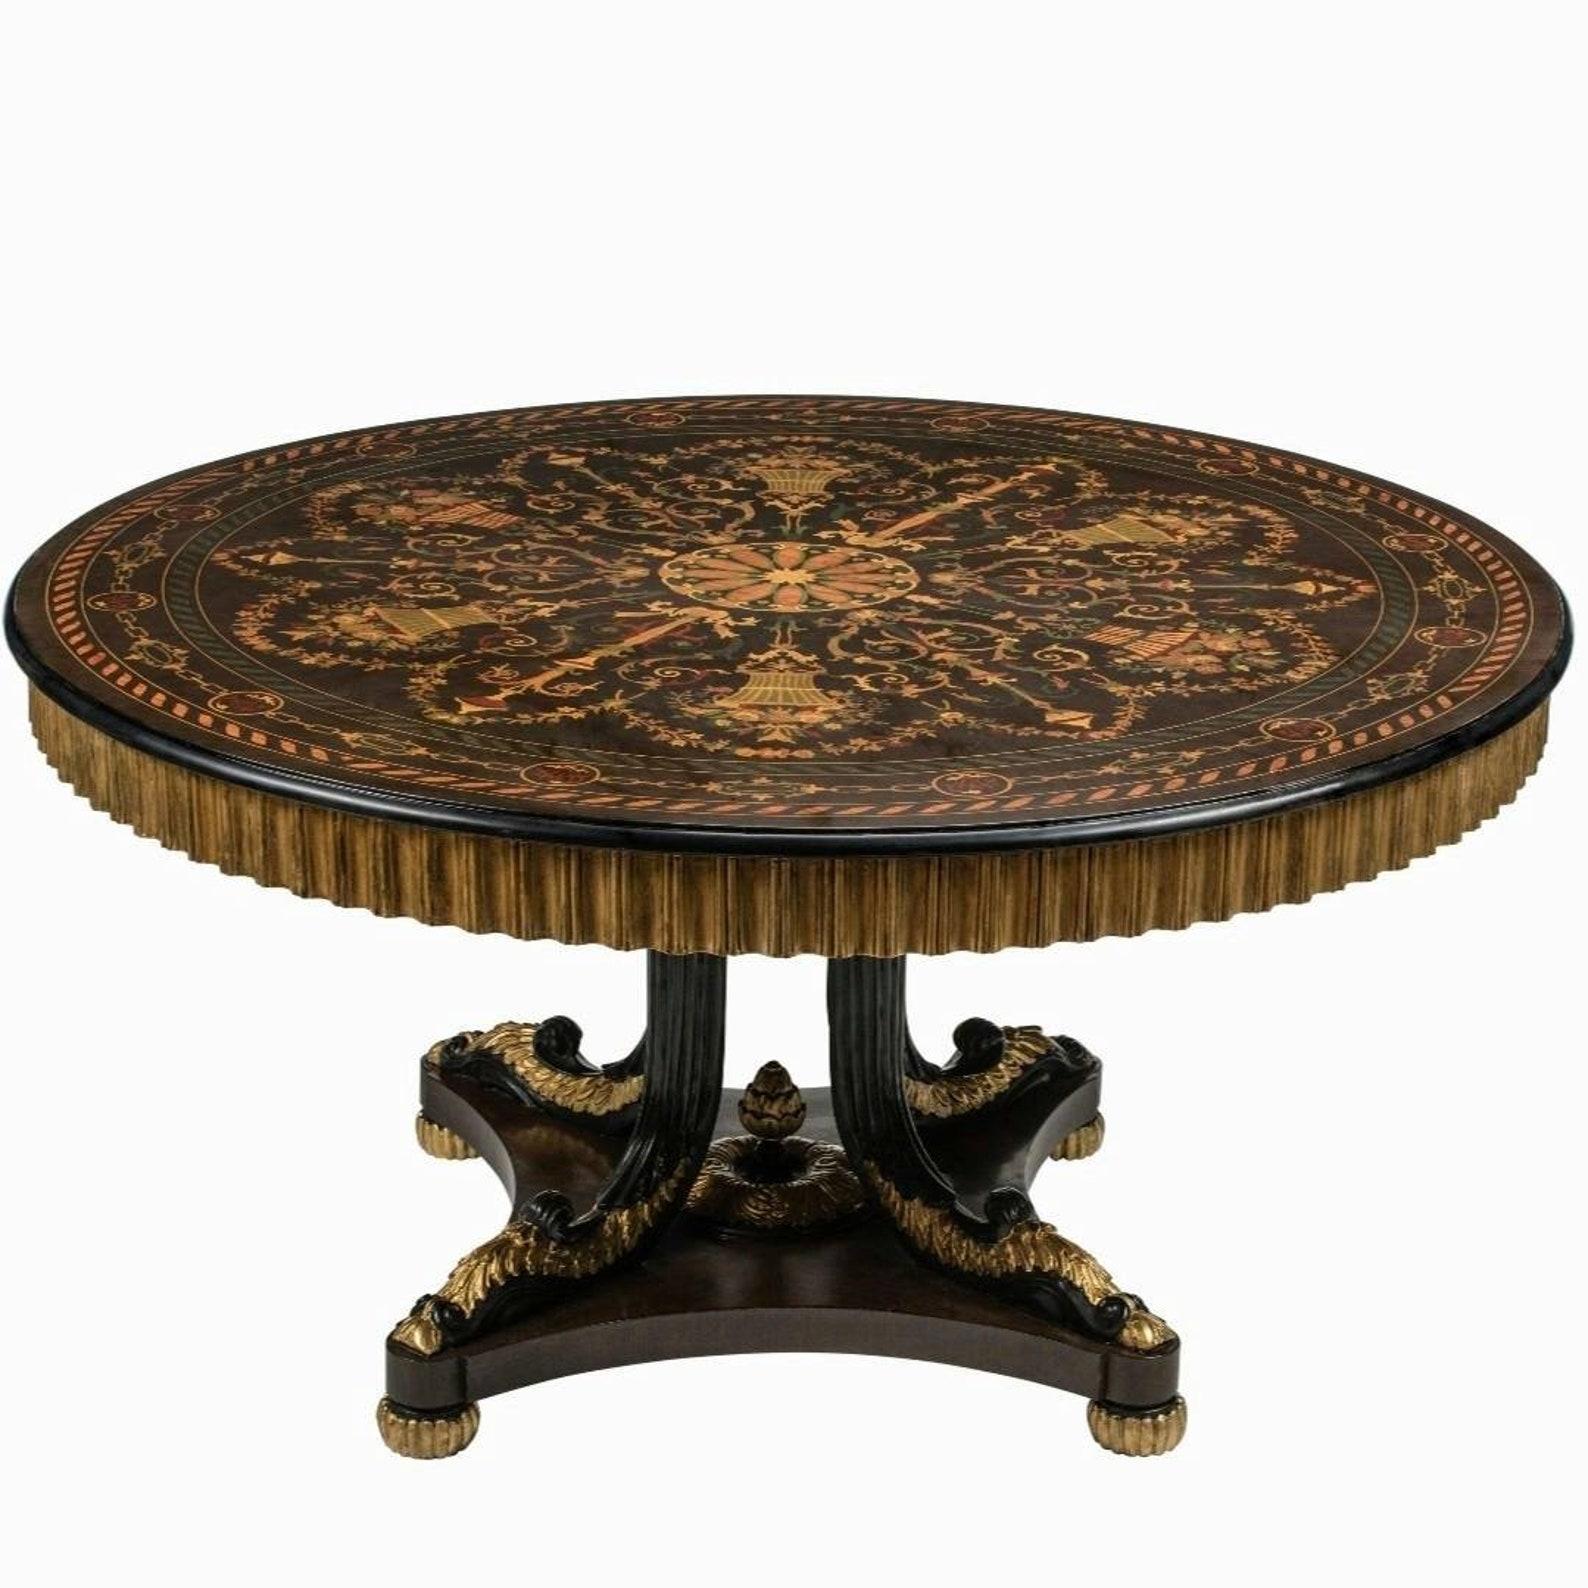 A magnificent antique French Napoleon III Second Empire style carved gilt wood black lacquer accented round dining table or centre table with exquisite marquetry-work.

Most impressive large size, very fine quality craftsmanship and construction,